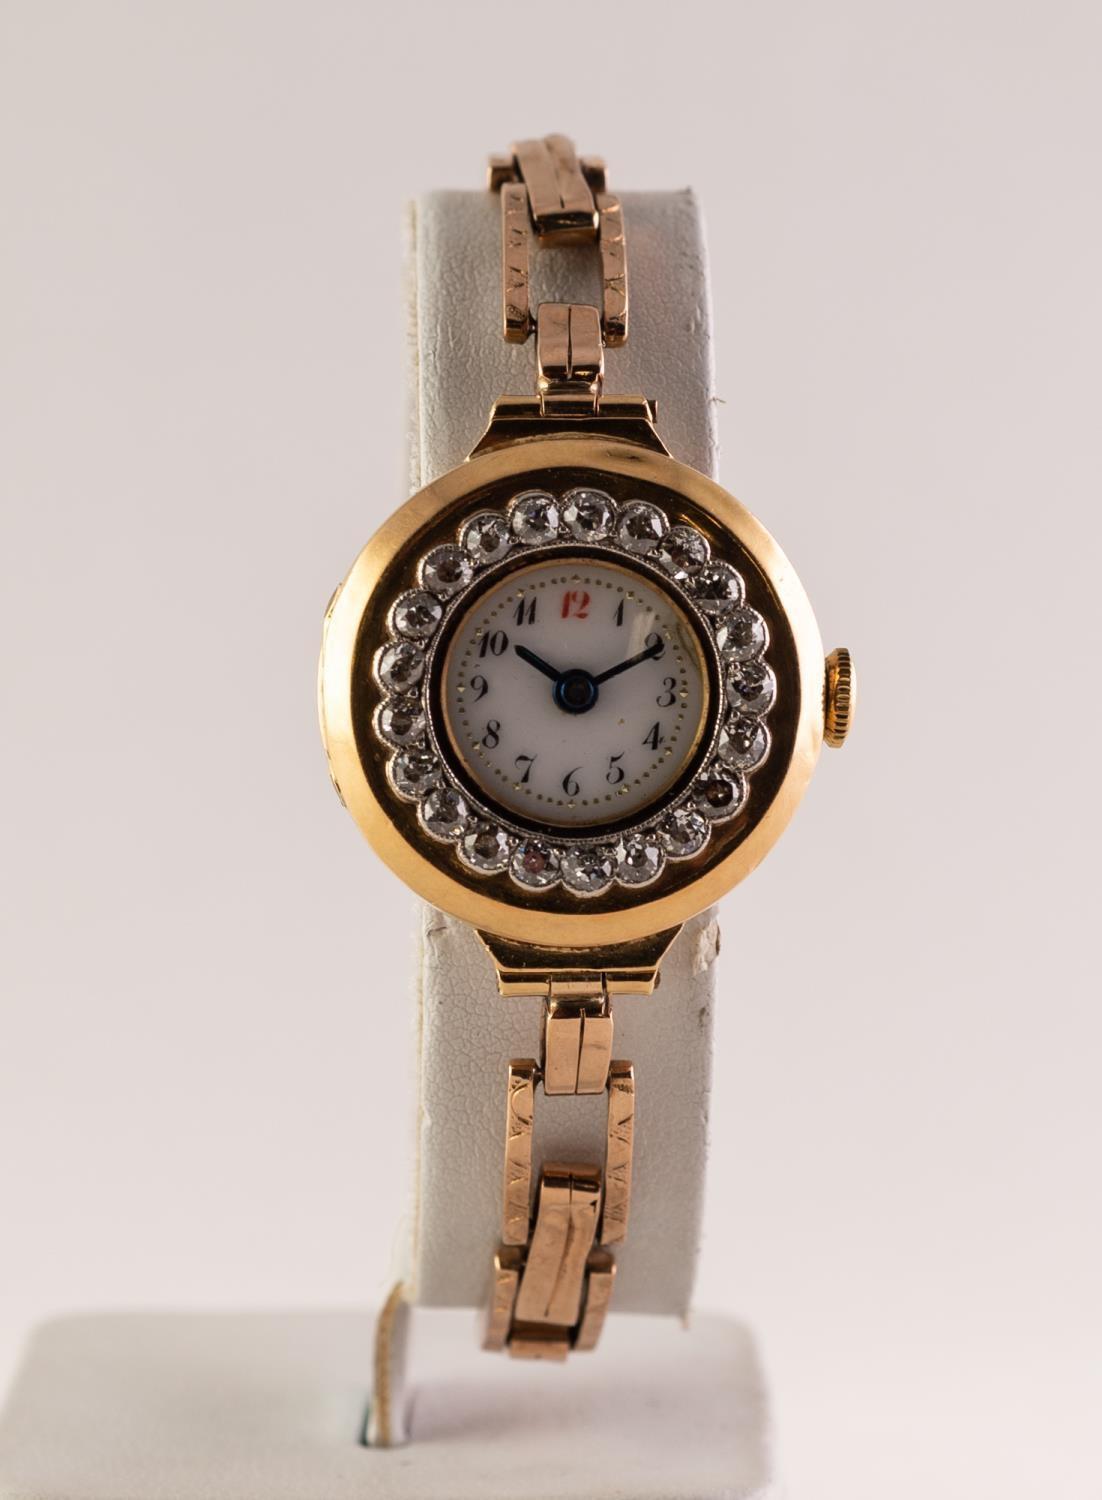 EARLY 20th CENTURY 18ct GOLD CASED LADY'S WRISTWATCH with 15 jewel movement, the besel set with 21 - Image 2 of 3